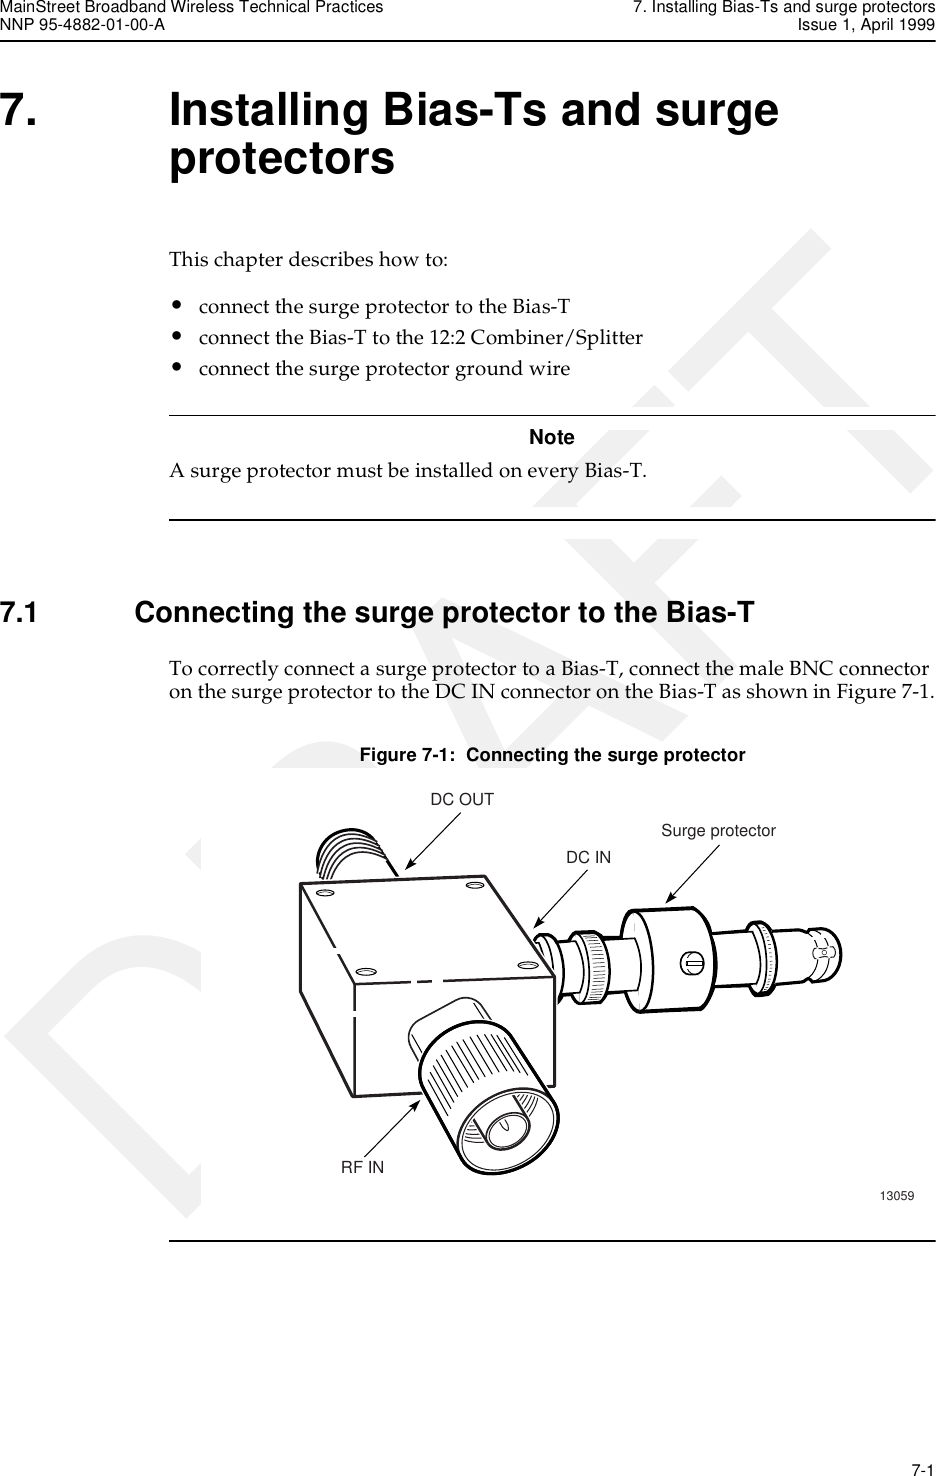 MainStreet Broadband Wireless Technical Practices 7. Installing Bias-Ts and surge protectorsNNP 95-4882-01-00-A Issue 1, April 1999   7-1DRAFT7. Installing Bias-Ts and surge protectorsThis chapter describes how to:•connect the surge protector to the Bias-T•connect the Bias-T to the 12:2 Combiner/Splitter•connect the surge protector ground wireNoteA surge protector must be installed on every Bias-T. 7.1 Connecting the surge protector to the Bias-TTo correctly connect a surge protector to a Bias-T, connect the male BNC connector on the surge protector to the DC IN connector on the Bias-T as shown in Figure 7-1.Figure 7-1:  Connecting the surge protector13059Surge protectorRF INDC OUTDC IN